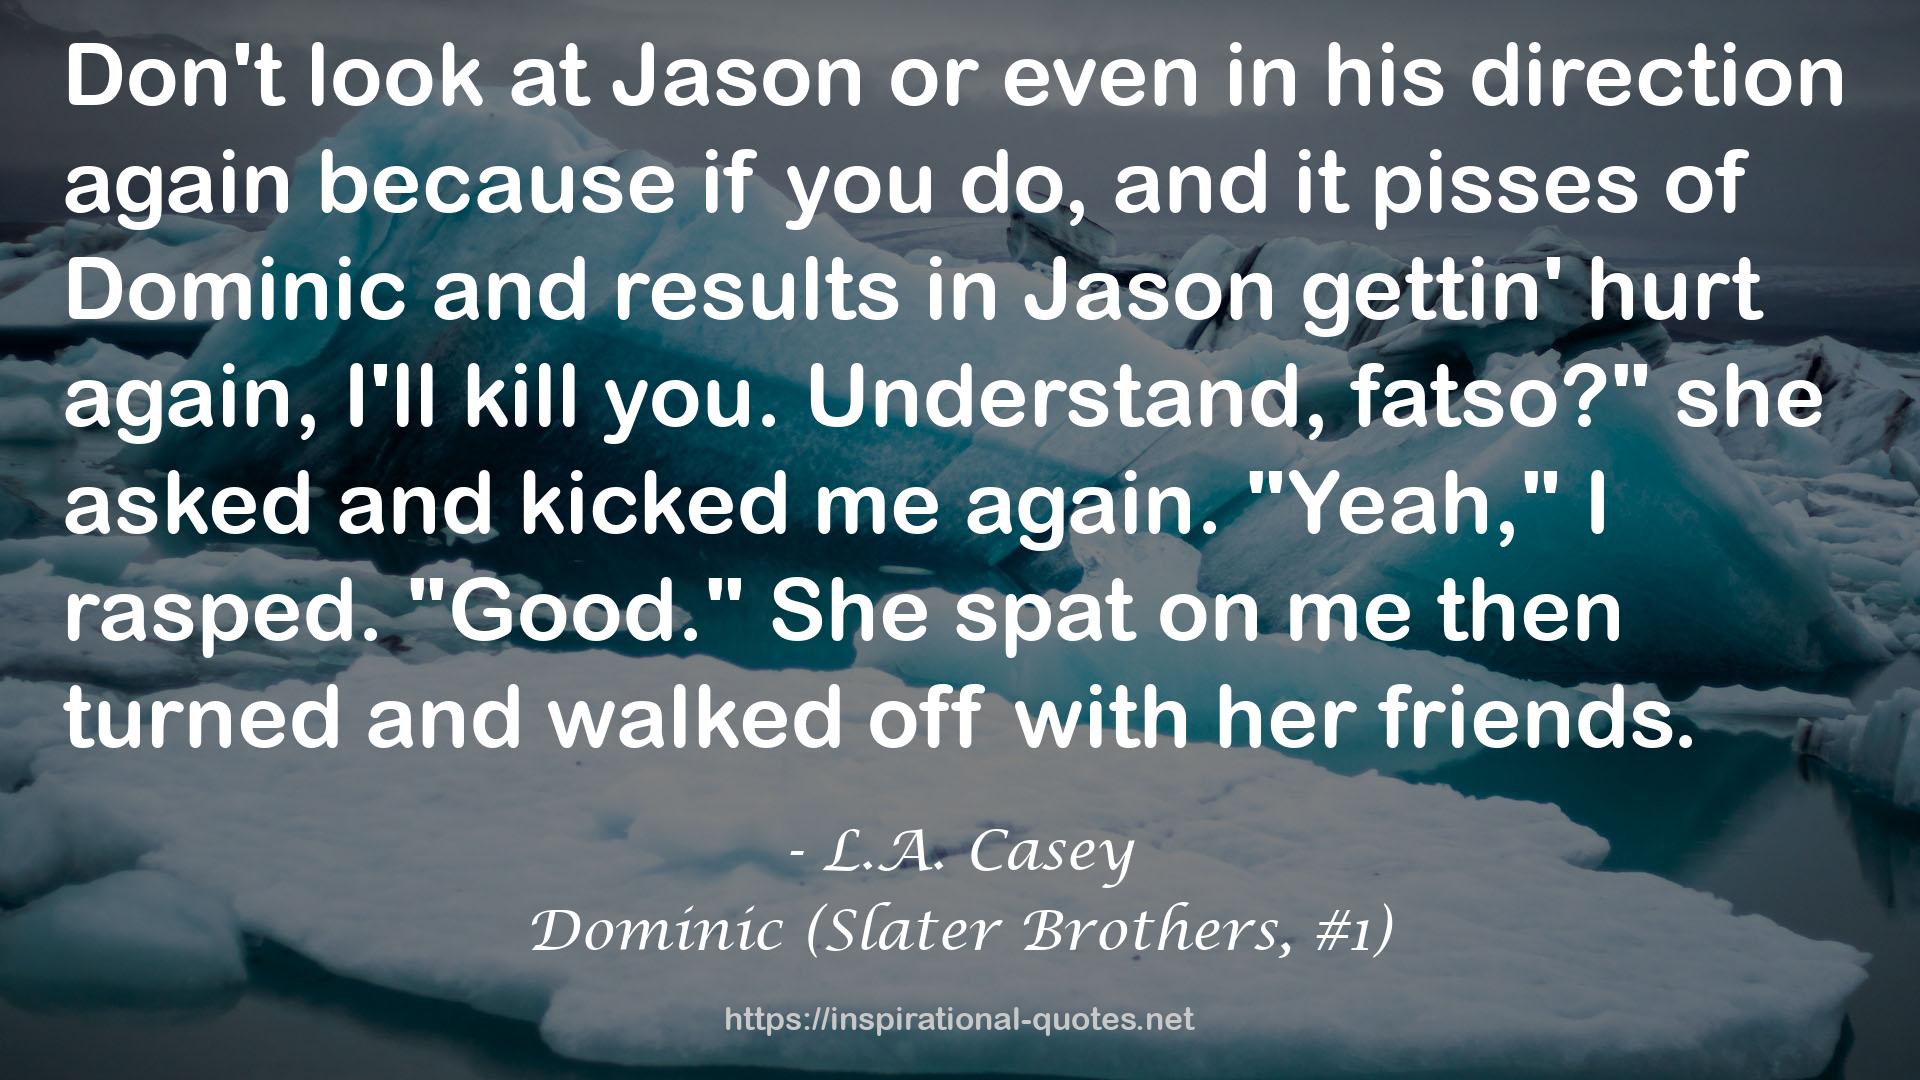 Dominic (Slater Brothers, #1) QUOTES